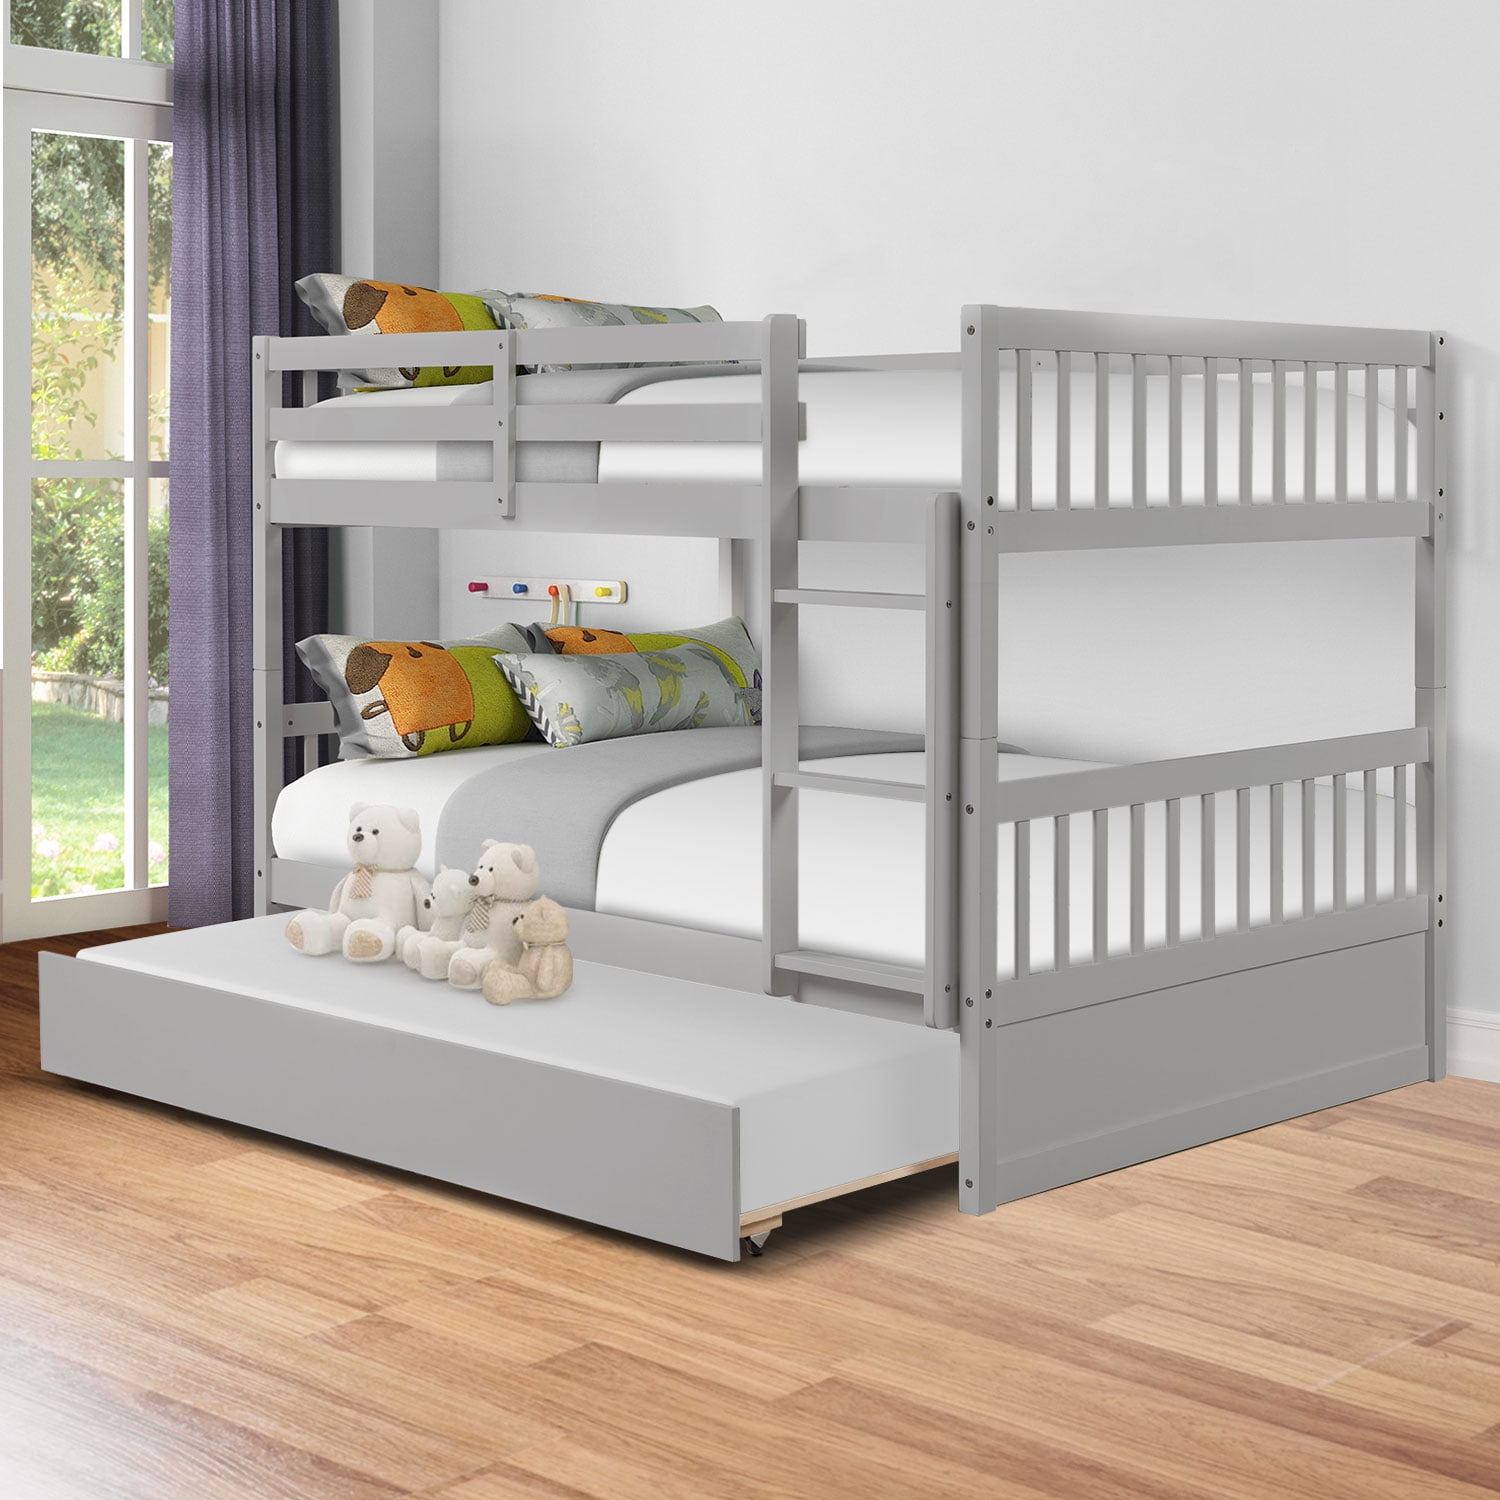 Trundle Sweden Pine Wood Bunk Beds, Crib Bunk Bed Combination